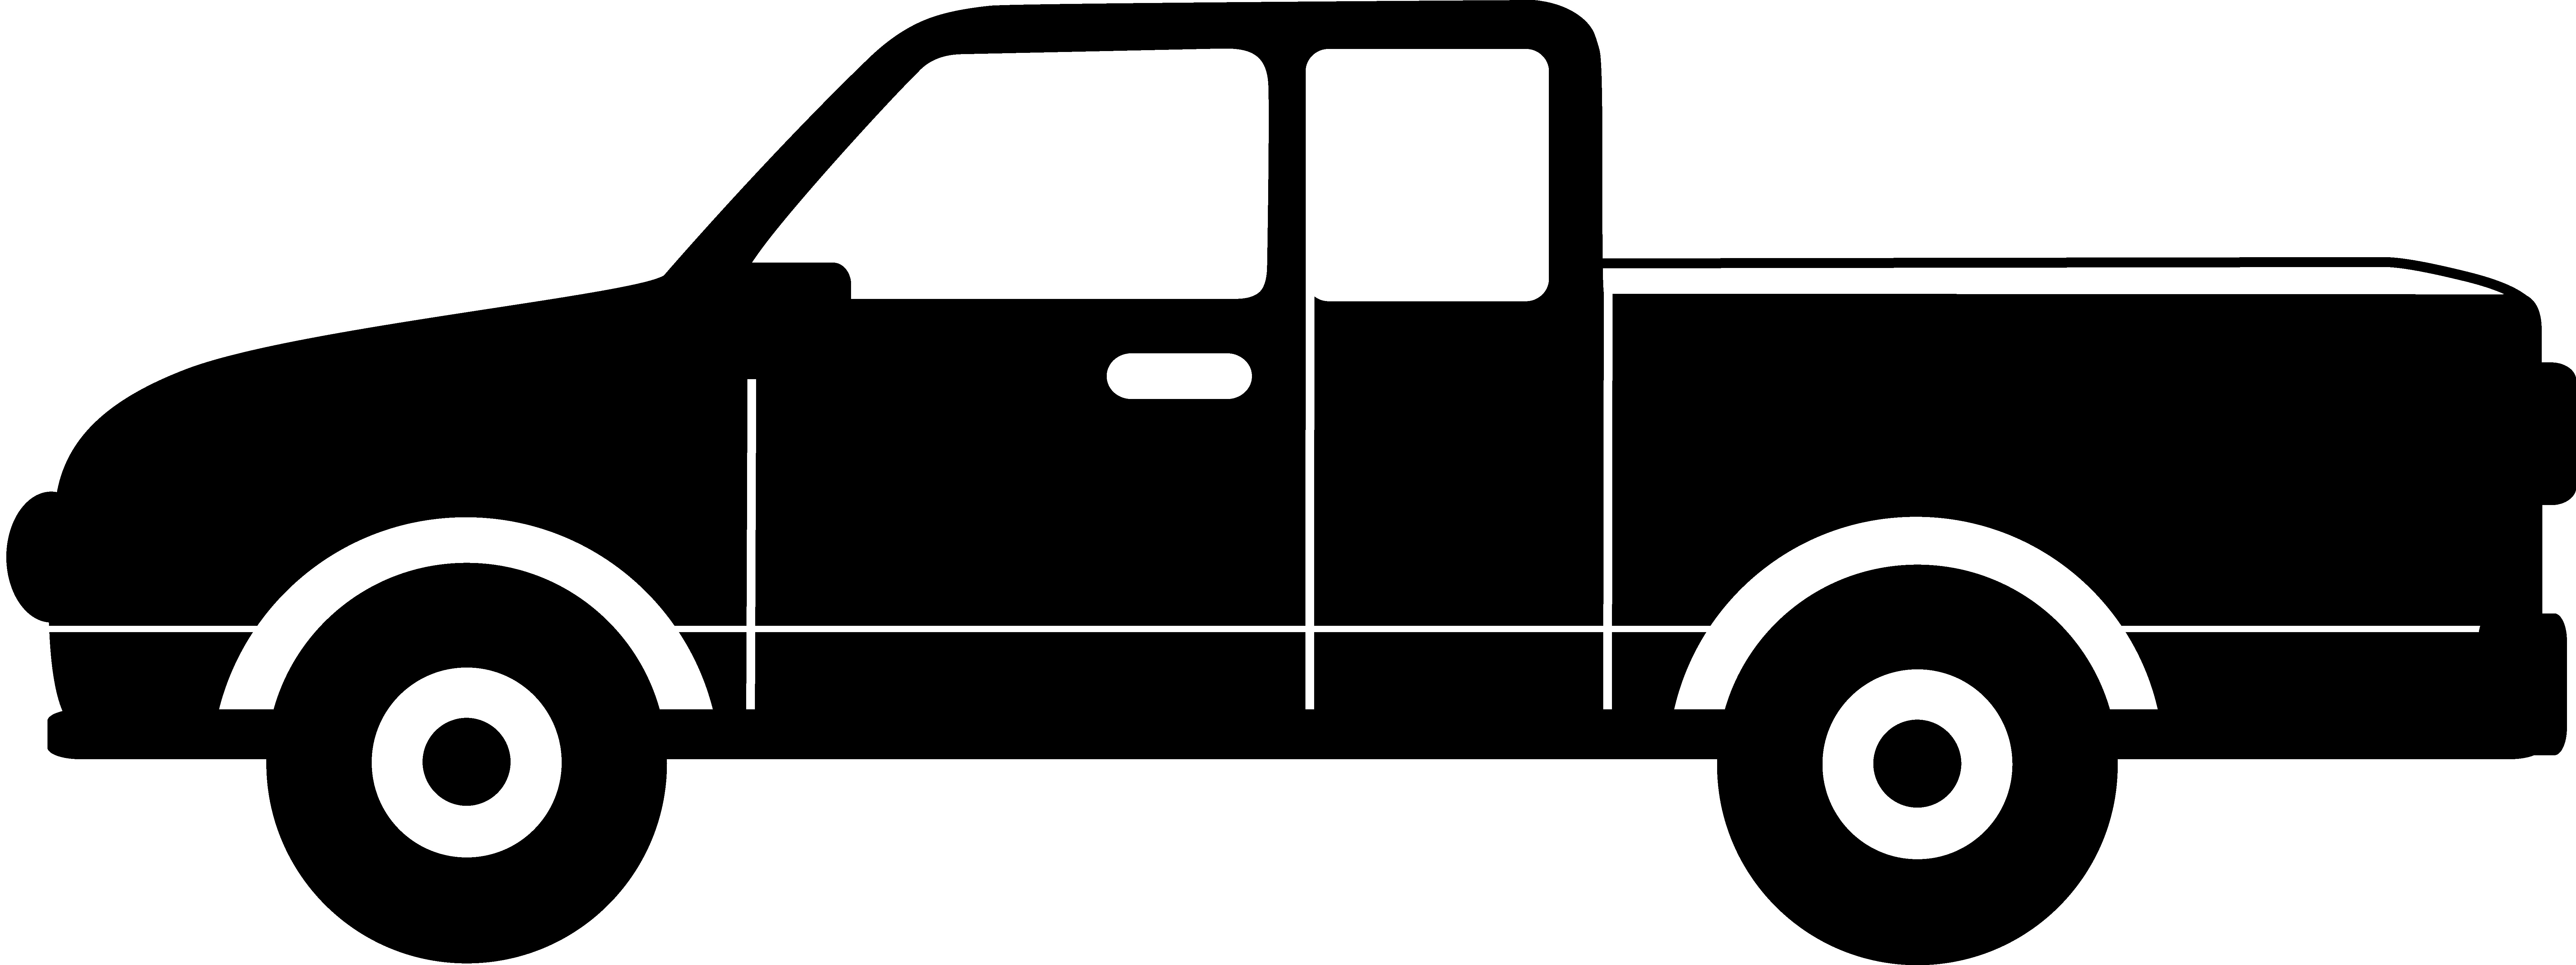 Truck and car clipart black and white